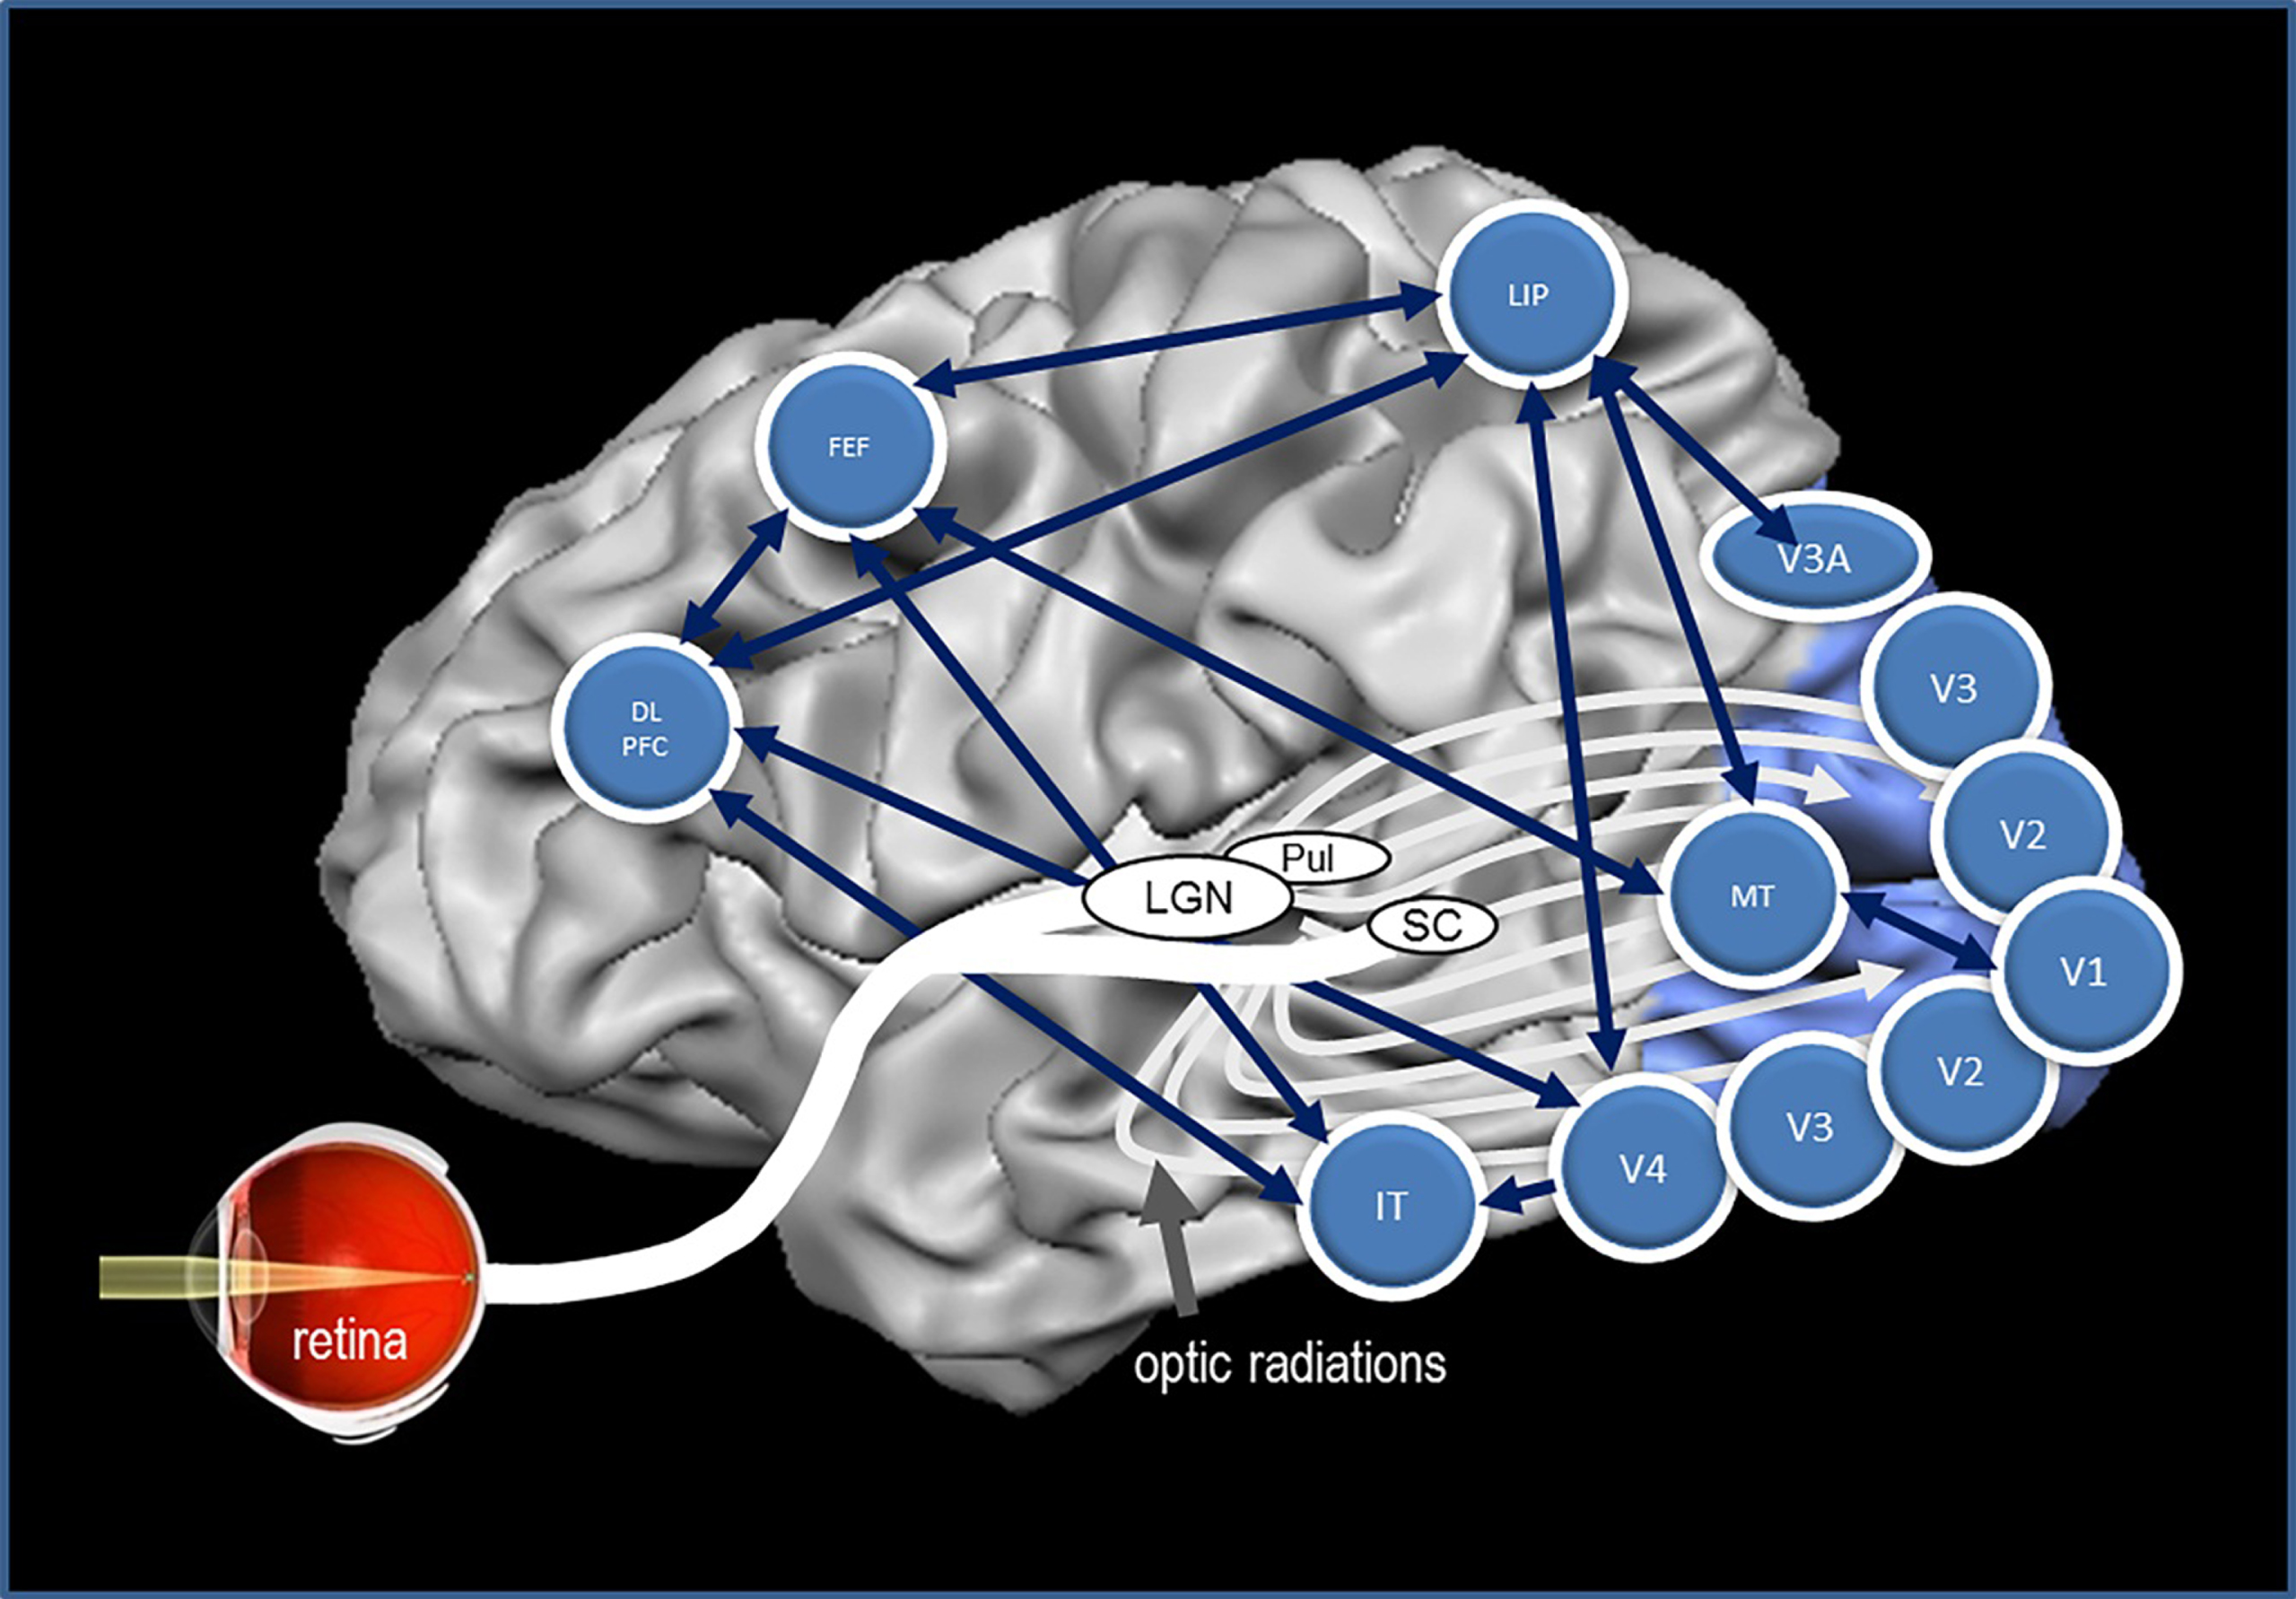 The brain’s network to control vision. Many structures of the brain need to interact synchronously to execute visually elicited performance. The vision network is comprised of the retina, subcortical structures, and cortical areas of the brain with multiple interactions with each other. This graph depicts some of the most important brain regions and their presumed functions. The structures and some of their main functions are depicted in Table 2.